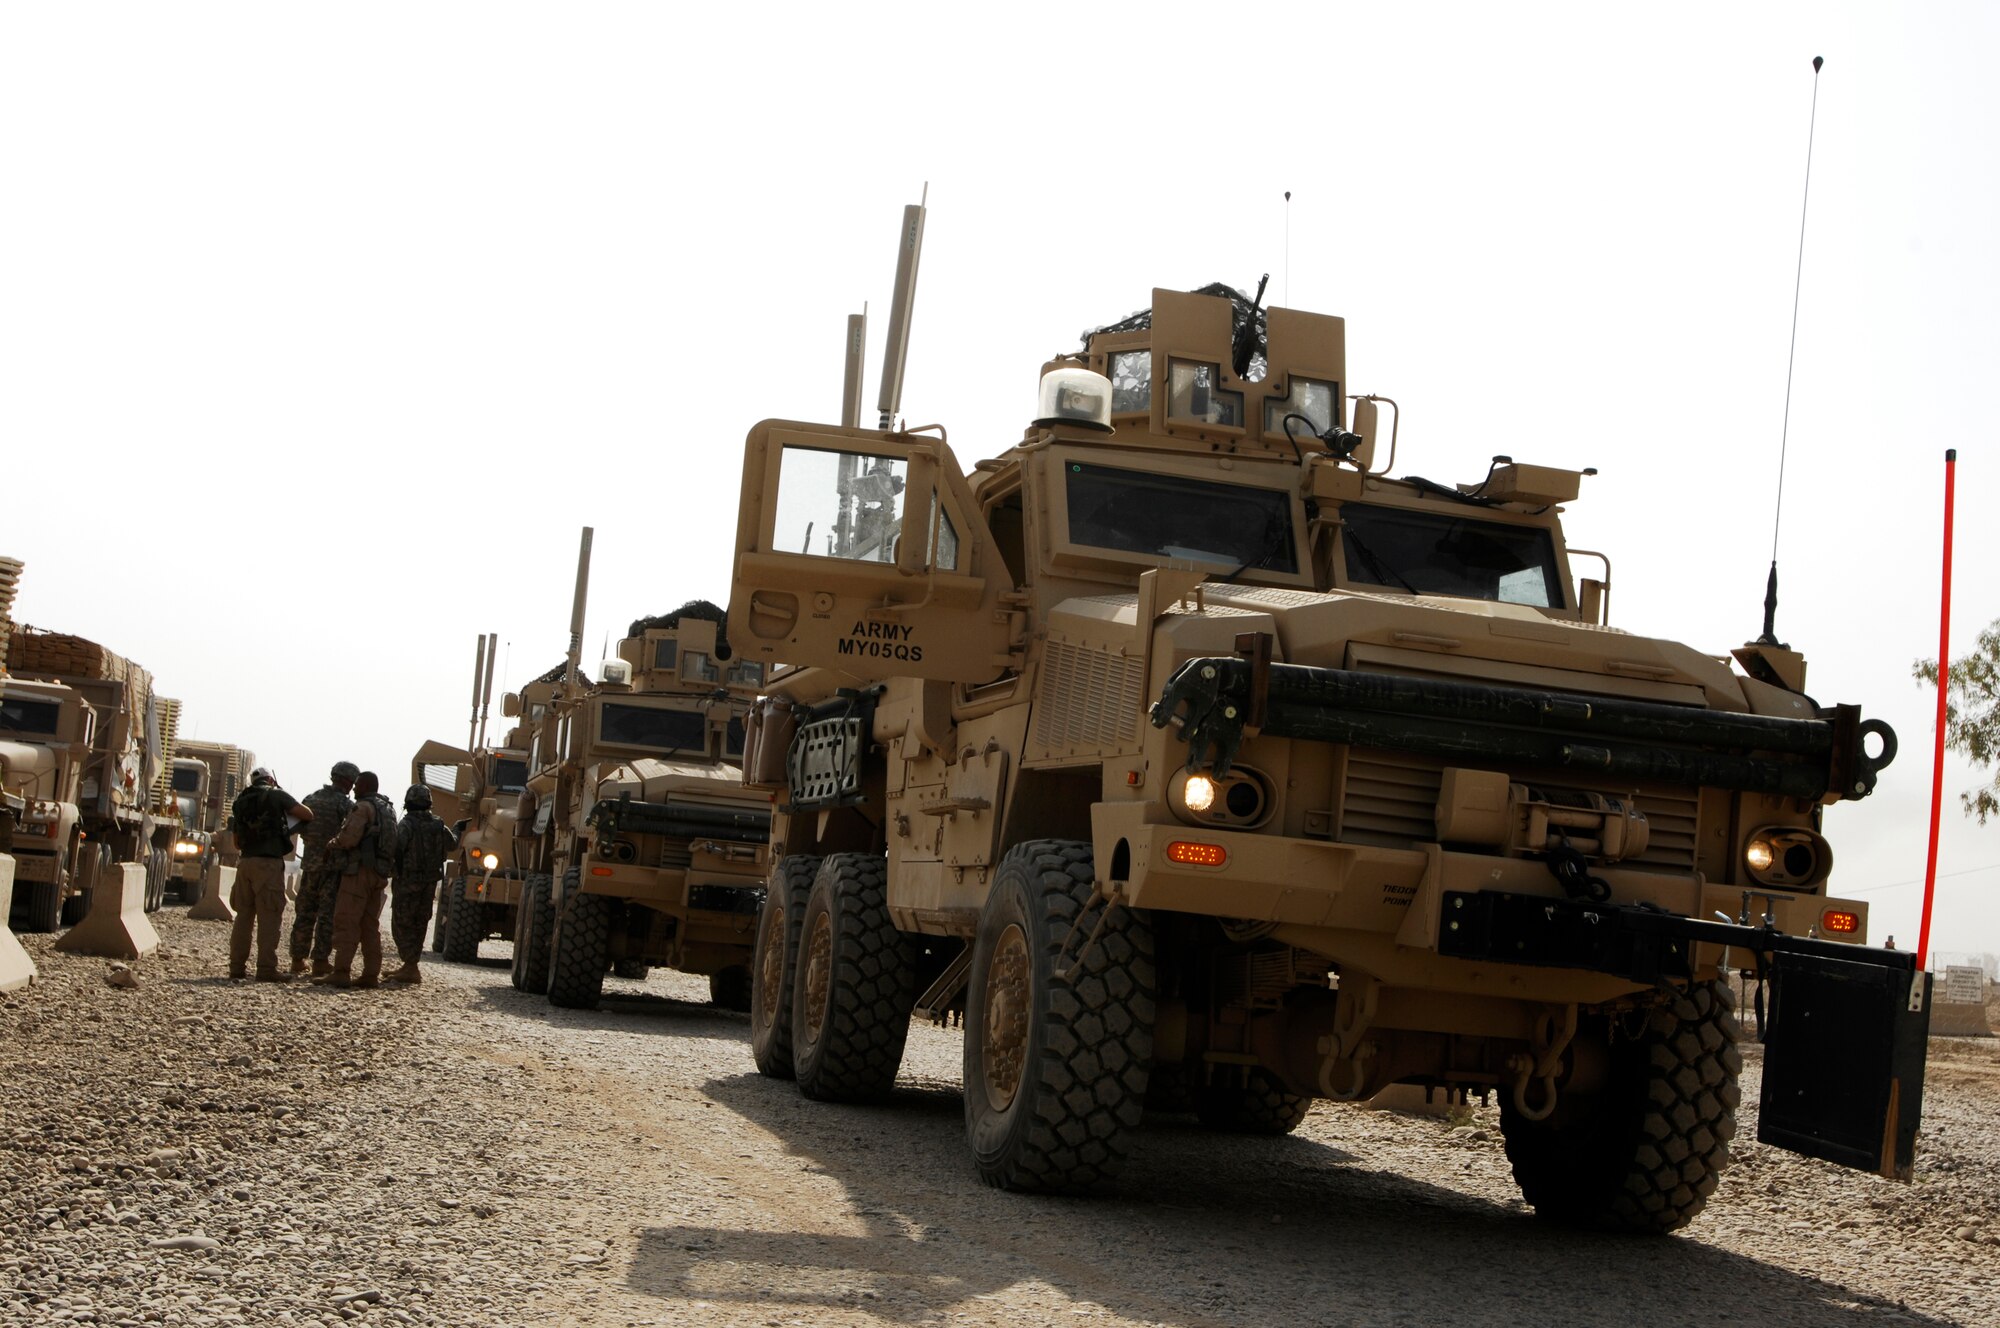 JOINT BASE BALAD, Iraq -- A convoy of mine-resistant ambush-protected vehicles, Humvees and tractor trailers waits at a staging point before convoying outside the wire to a forward operating base Sept. 4. The 732nd Expeditionary Civil Engineer Squadron Utilities Detachment 6 prefabricates as much of its work as possible here before transporting it to the construction site. This maximizes the speed of construction and minimizes time spent outside the wire under threat. The 732nd ECES and other squadrons within the 732nd Air Expeditionary Group here are composed of joint source solution Airmen who fill taskings traditionally performed outside the wire by the Army. (U.S. Air Force photo/Airman 1st Class Jason Epley)